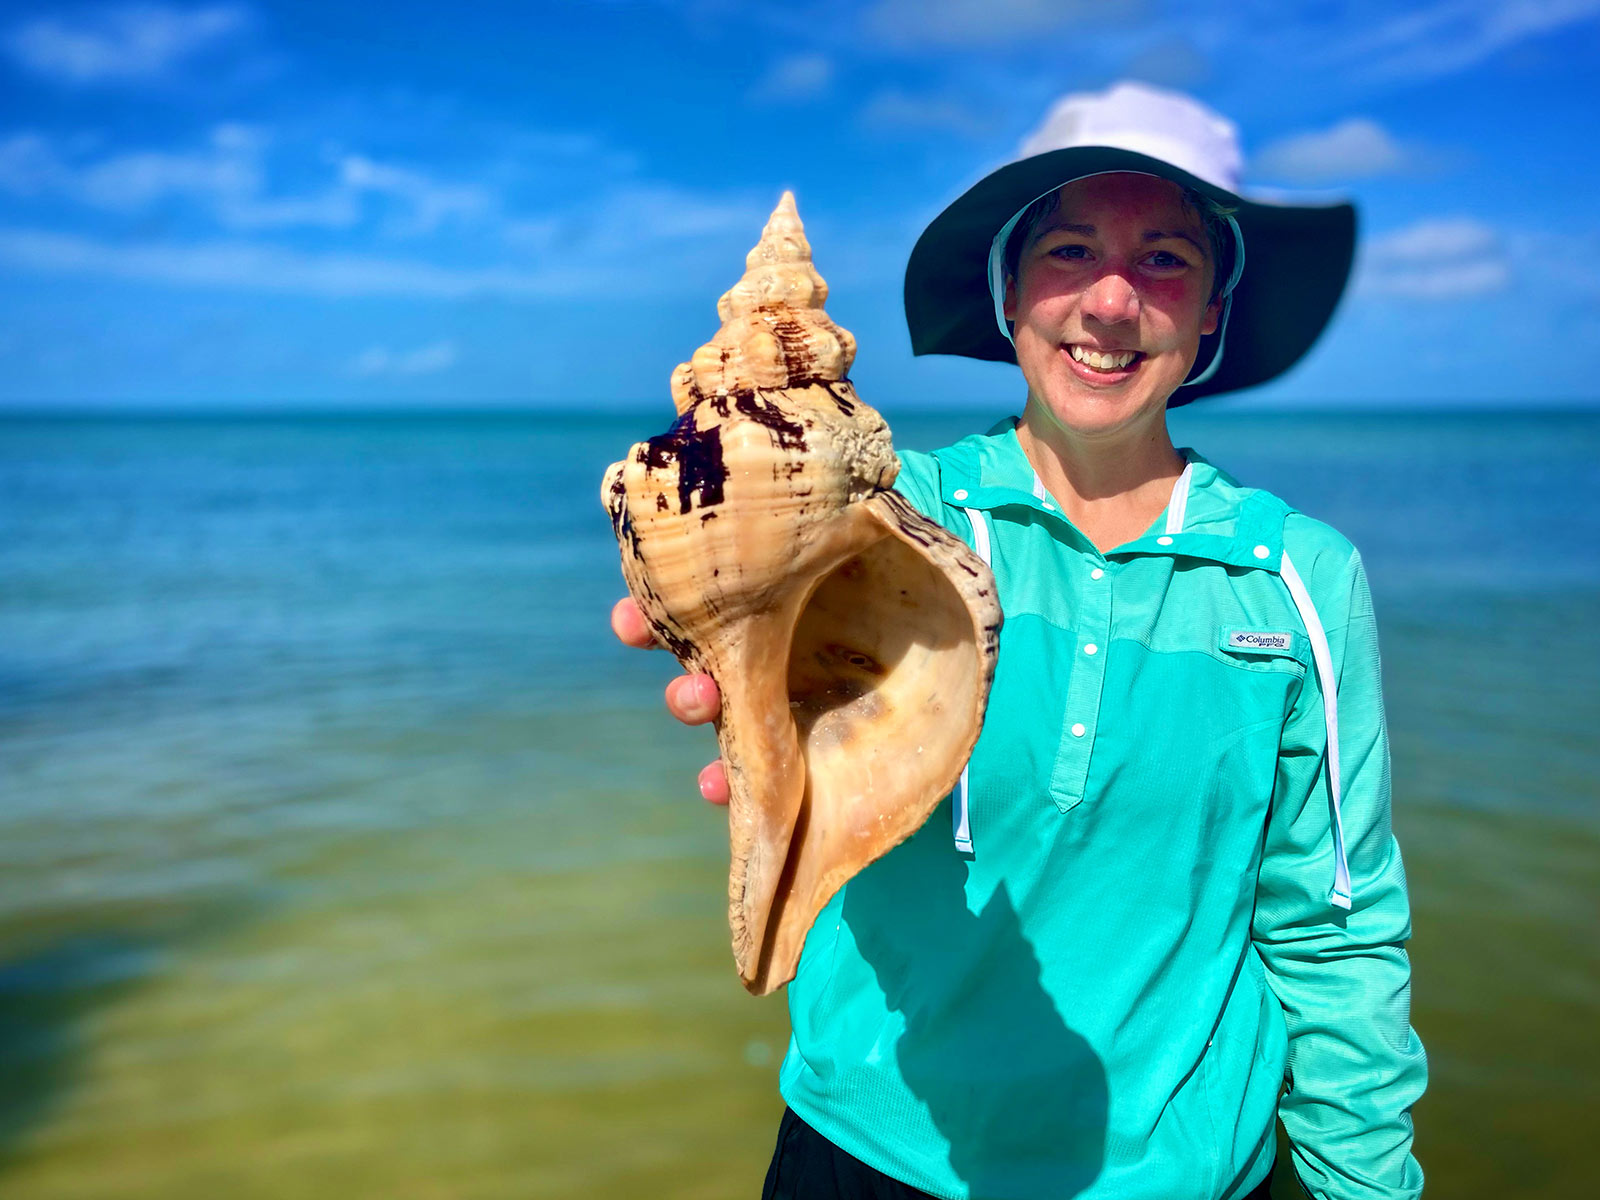 Large Horse Conch discovered on an Kice Island. Everwater Charters & Tours Shelling Tour of the Ten Thousand Islands, Florida